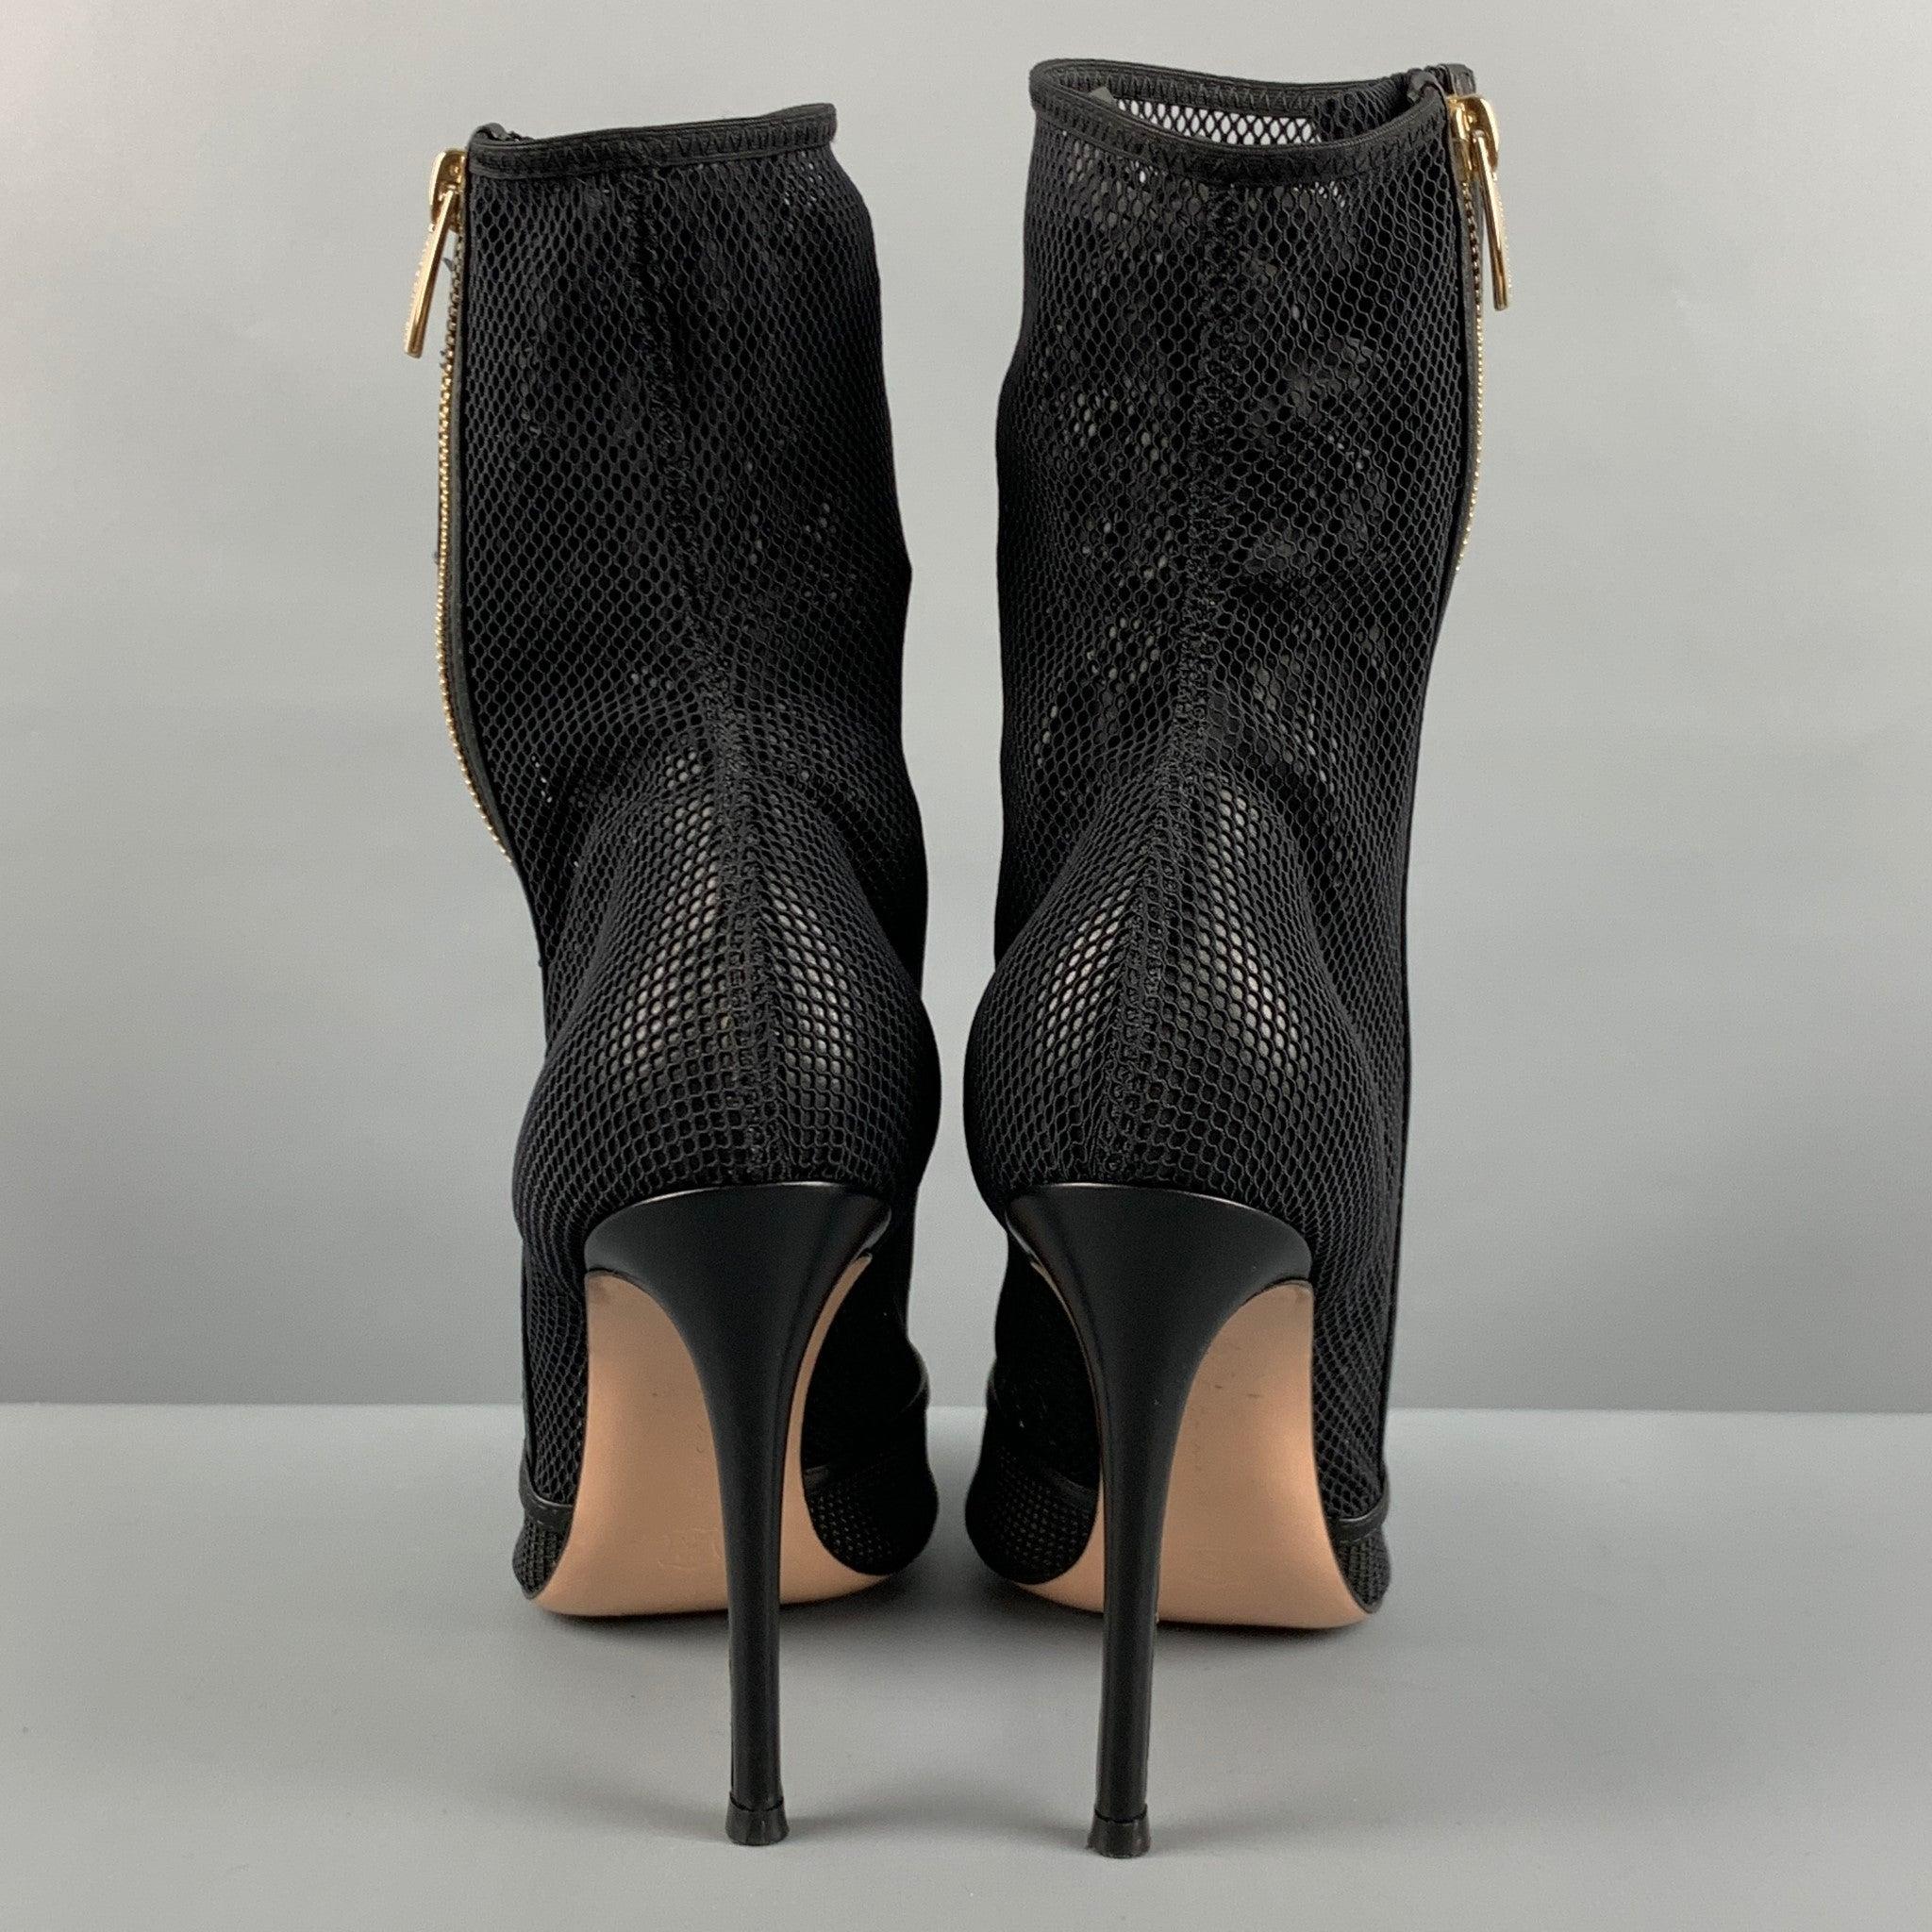 GIANVITO ROSSI Size 9.5 Black Mesh Side Zipper Boots In Good Condition For Sale In San Francisco, CA